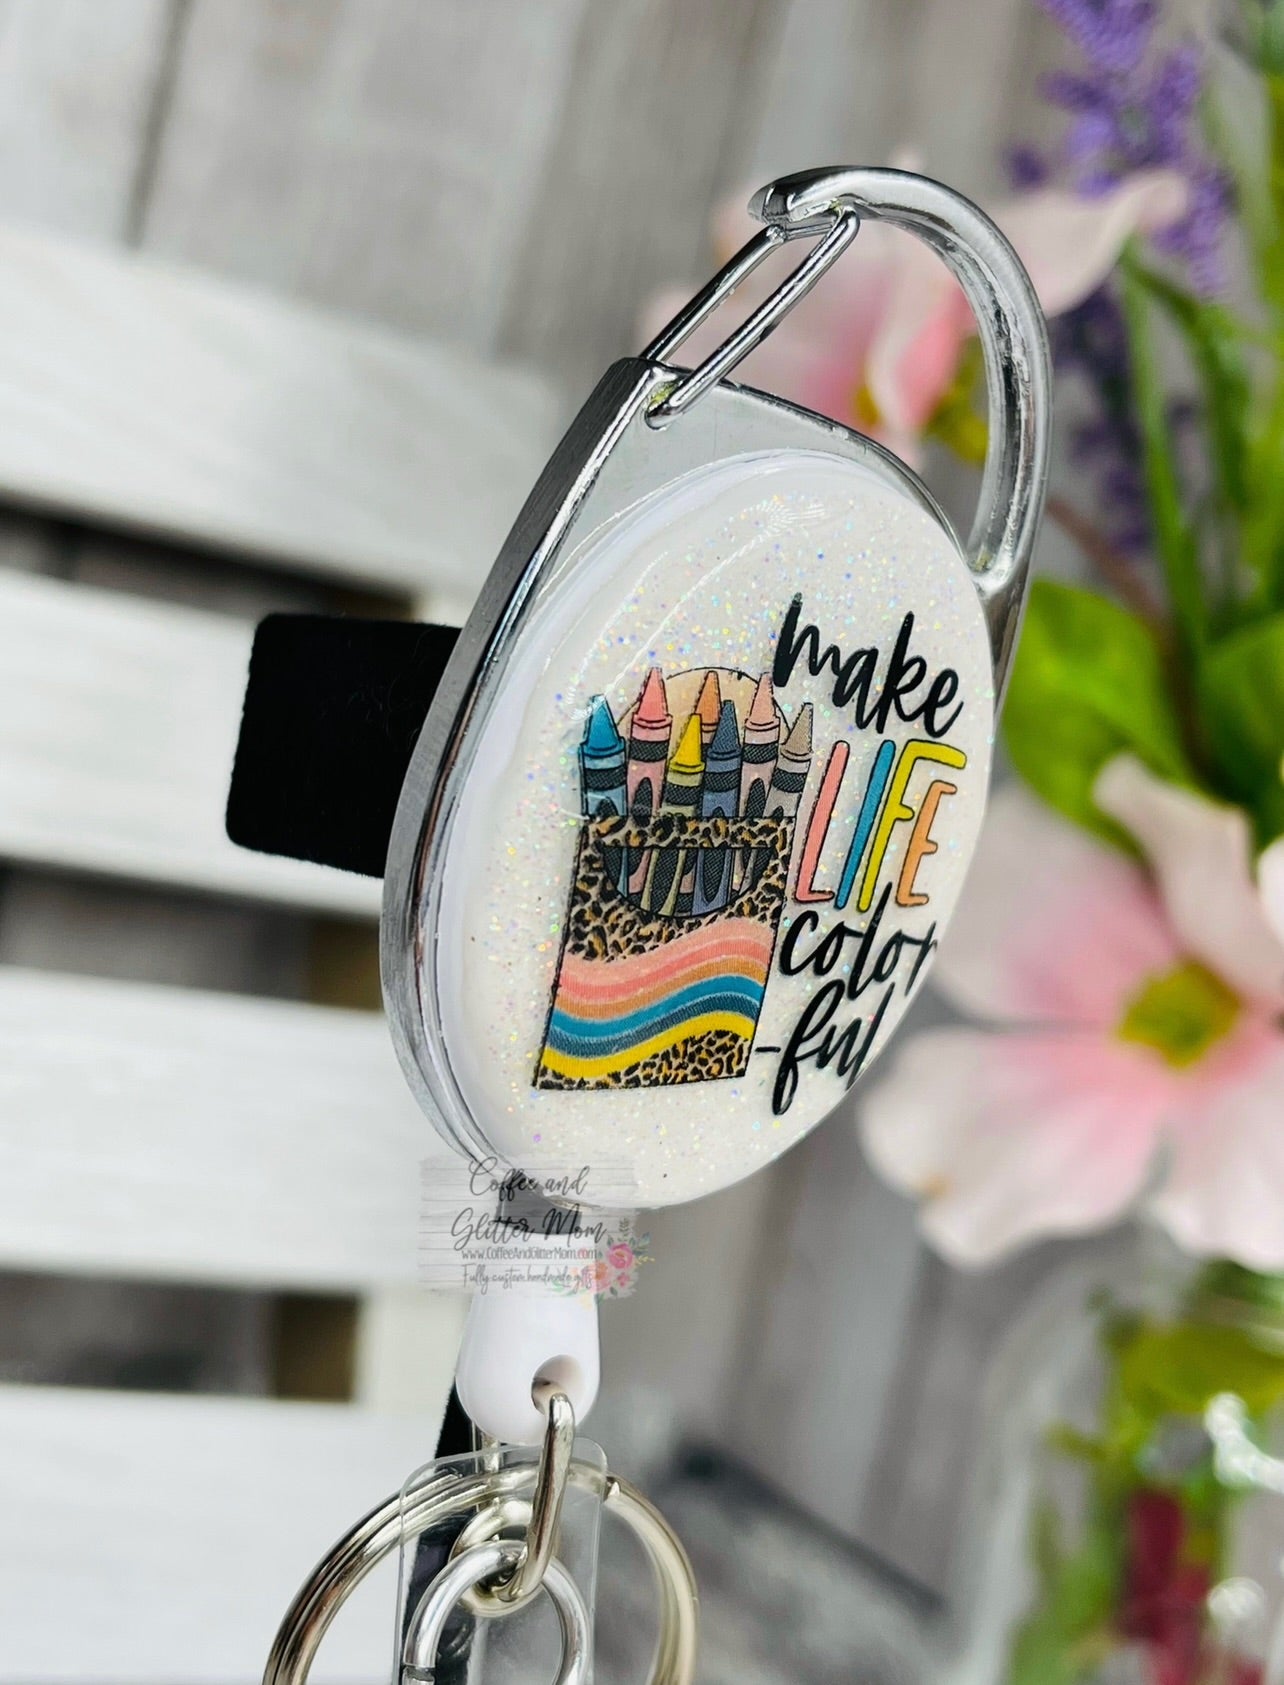 Make Life Colorful Clip On Retractable Key Ring